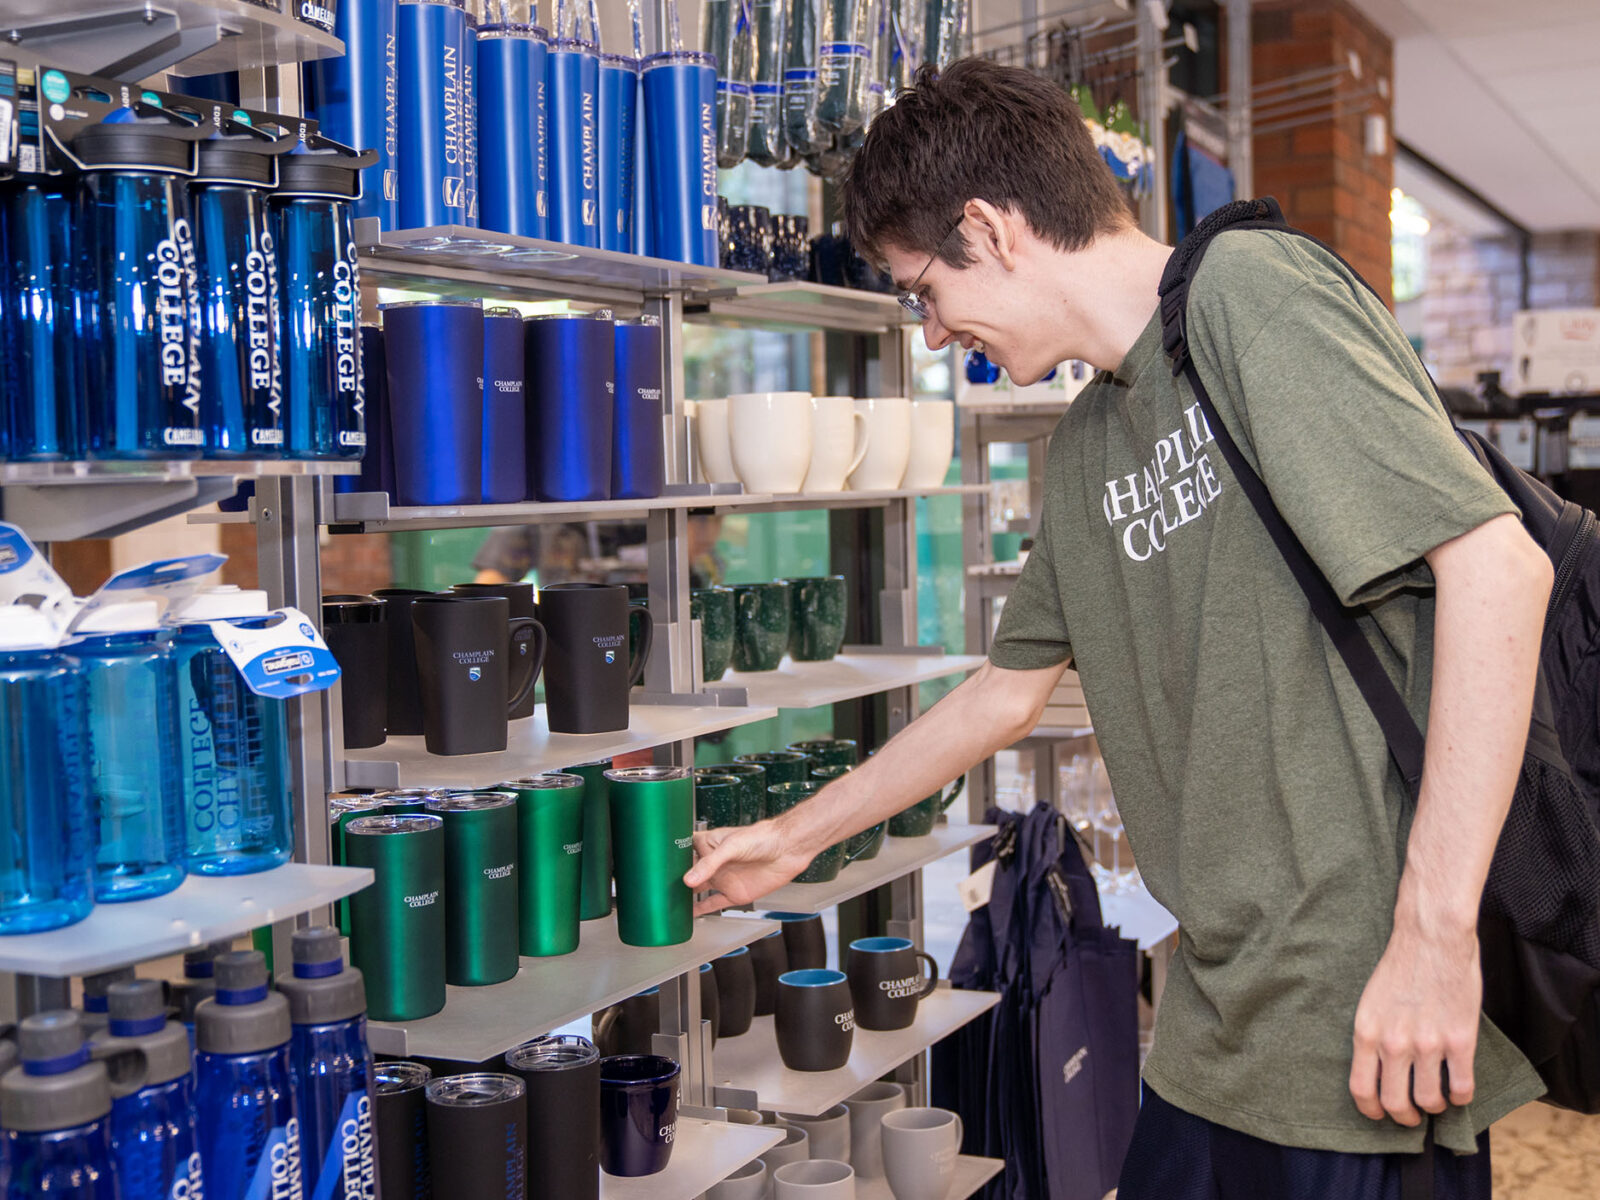 champlain college student shopping in the campus store